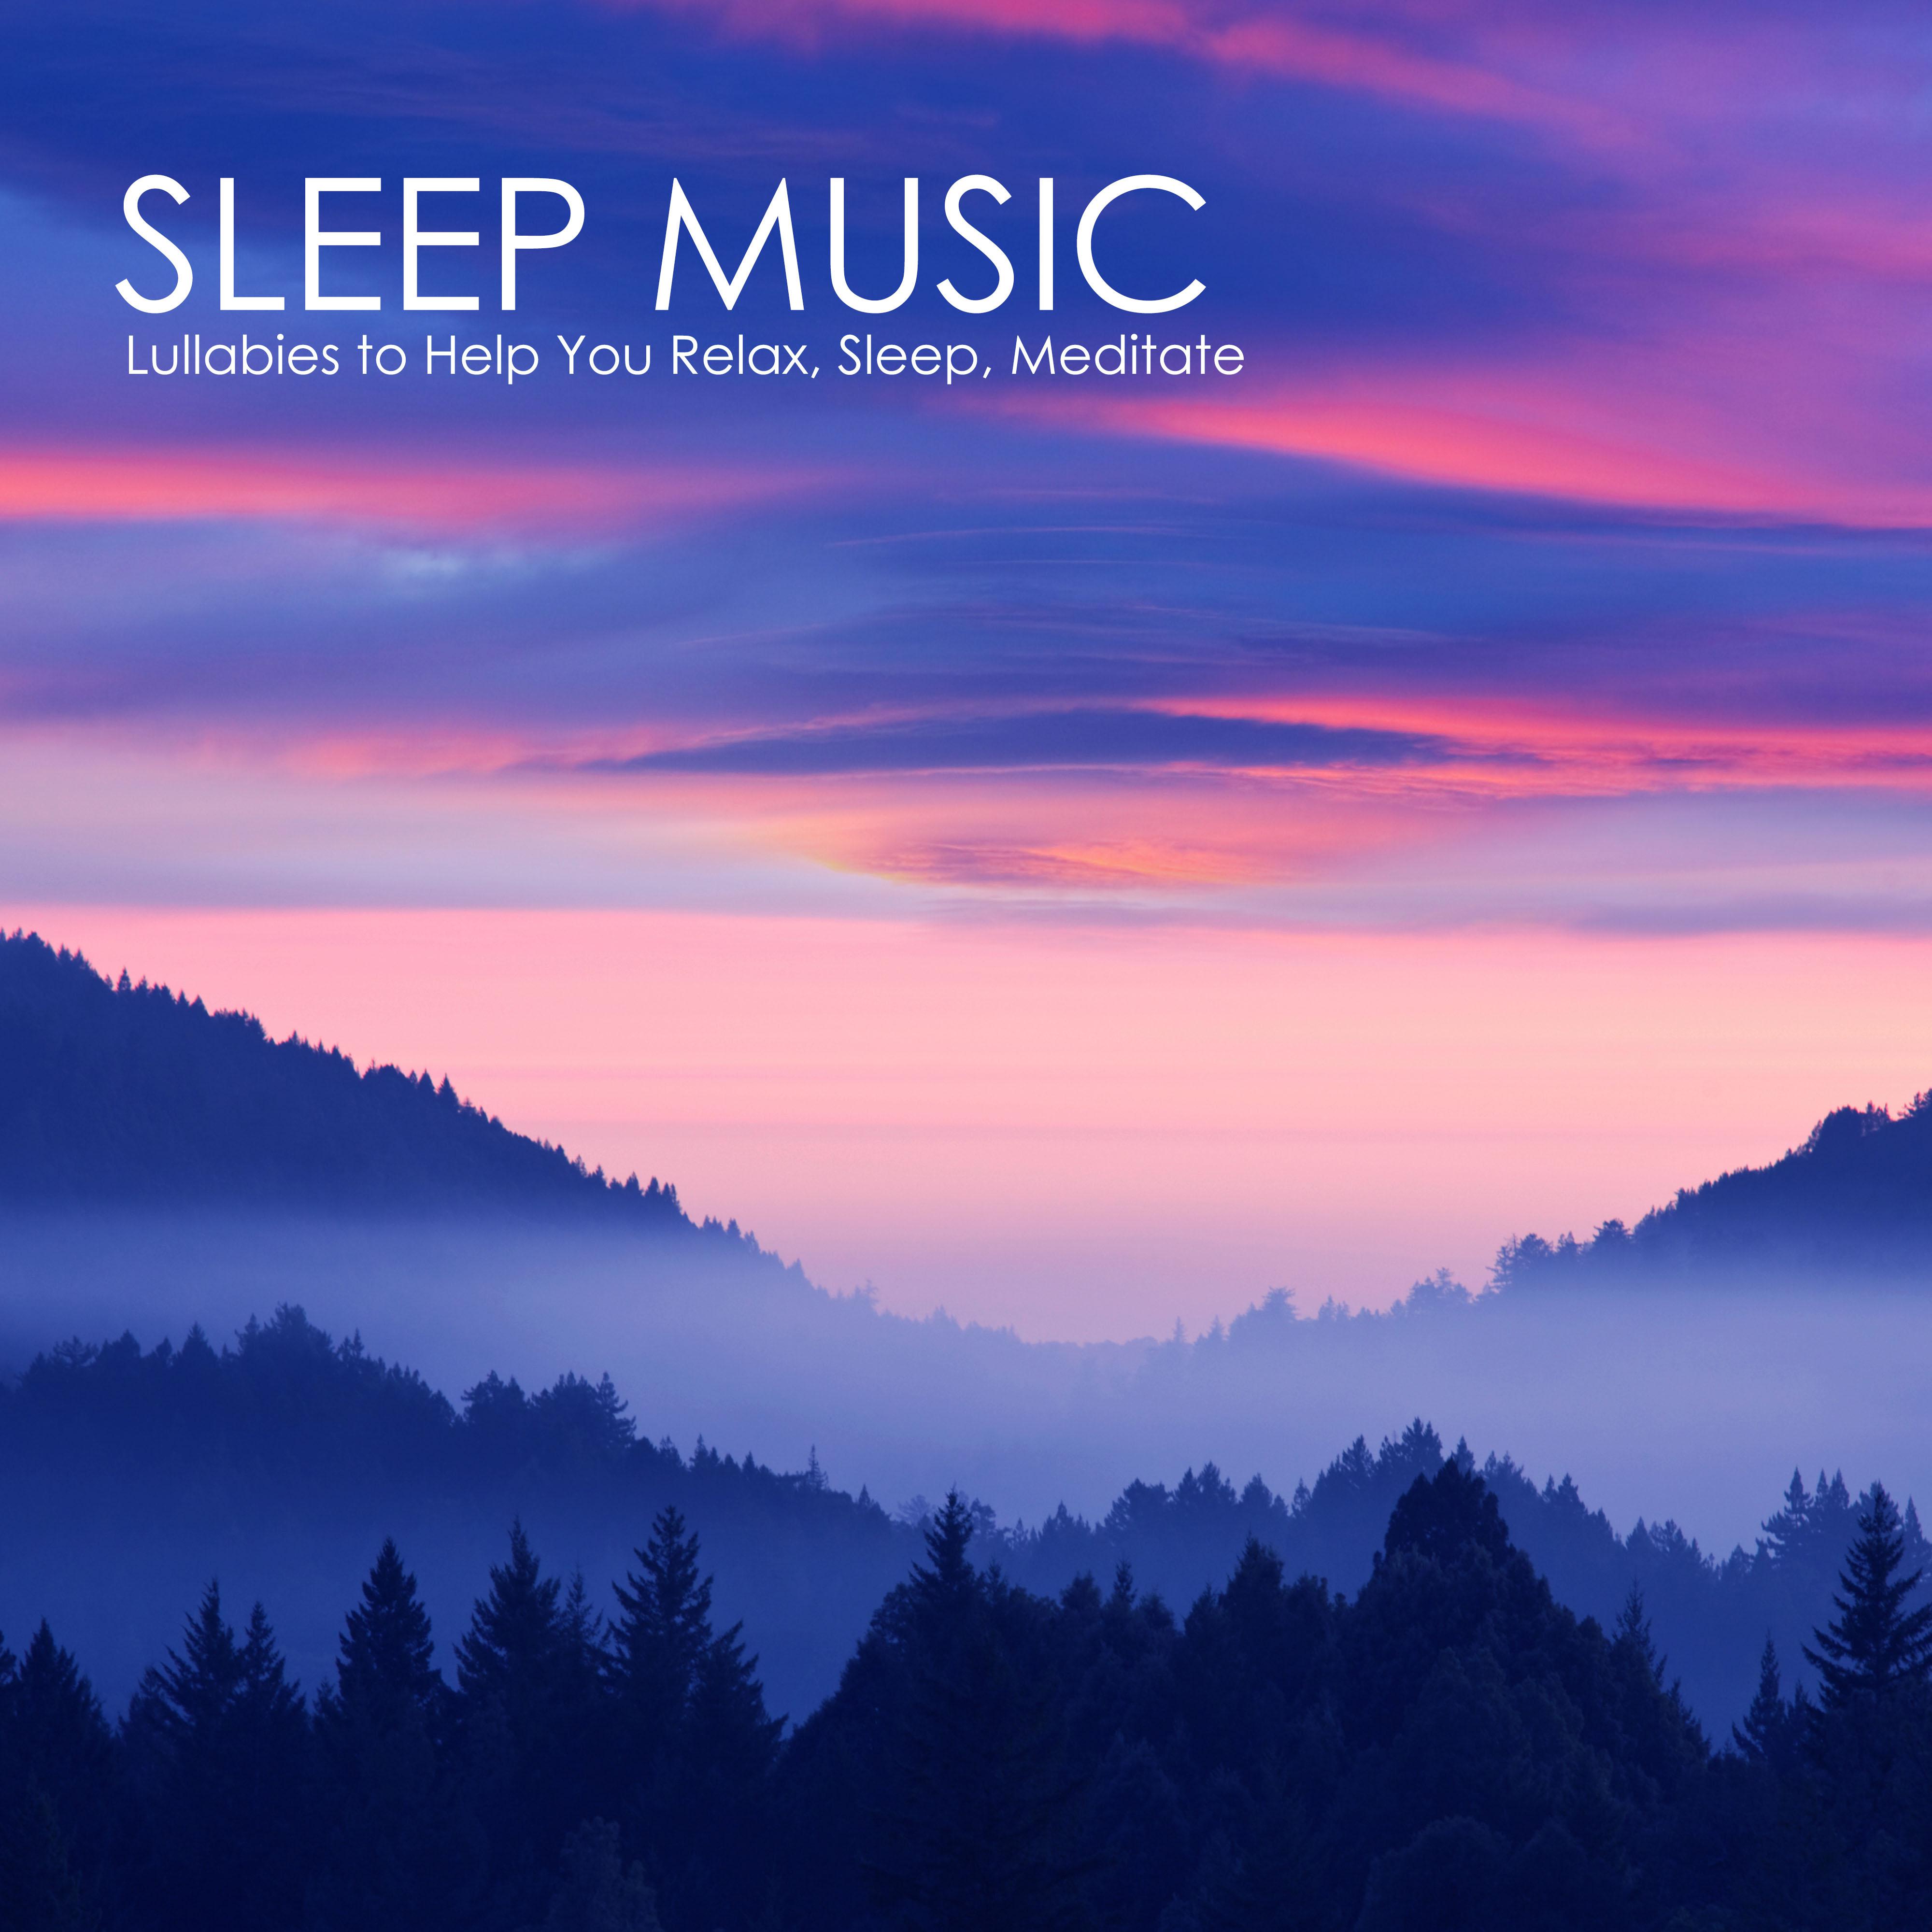 Sleep Music: Lullabies to Help You Relax, Sleep, Meditate and Heal with Relaxing Piano Music, Nature Sounds and Natural Noise